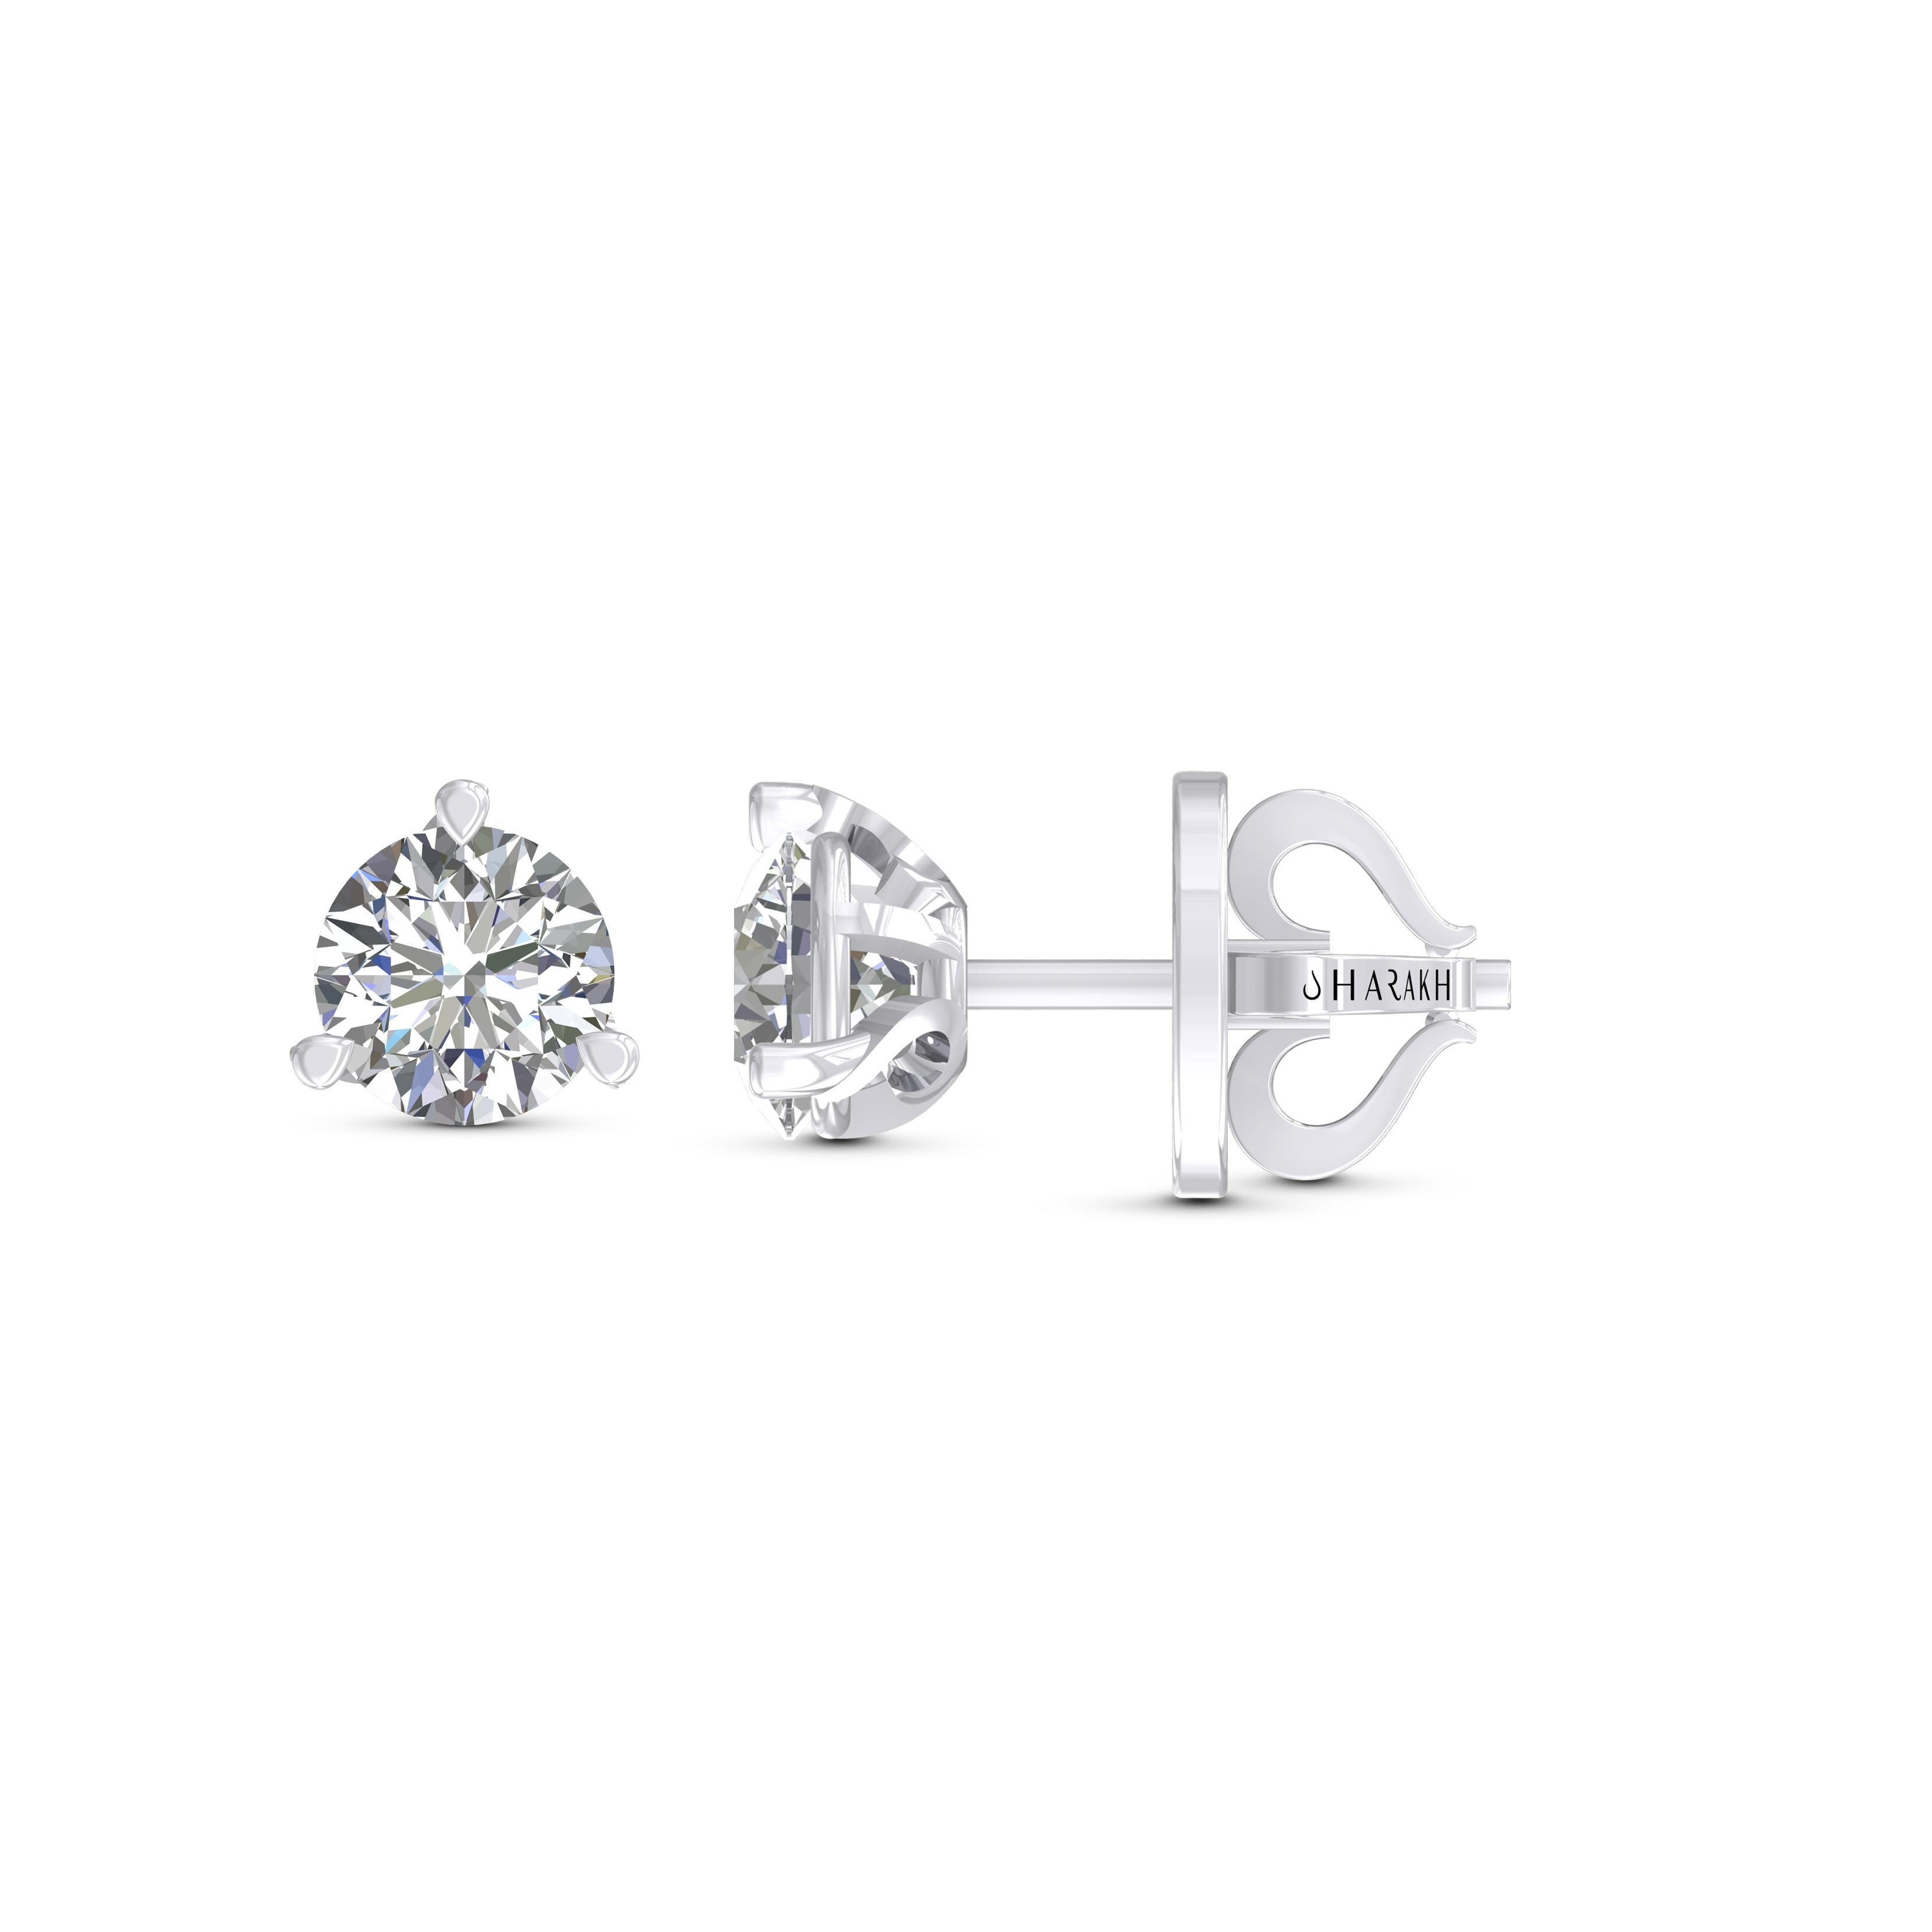 These classic GIA certified diamond studs showcase a pair of perfectly matched diamonds weighing total 2.01 carats. Crafted in 18 karat white gold, these are available in yellow and rose gold as well.
Perfect for gifting and for yourself as well.